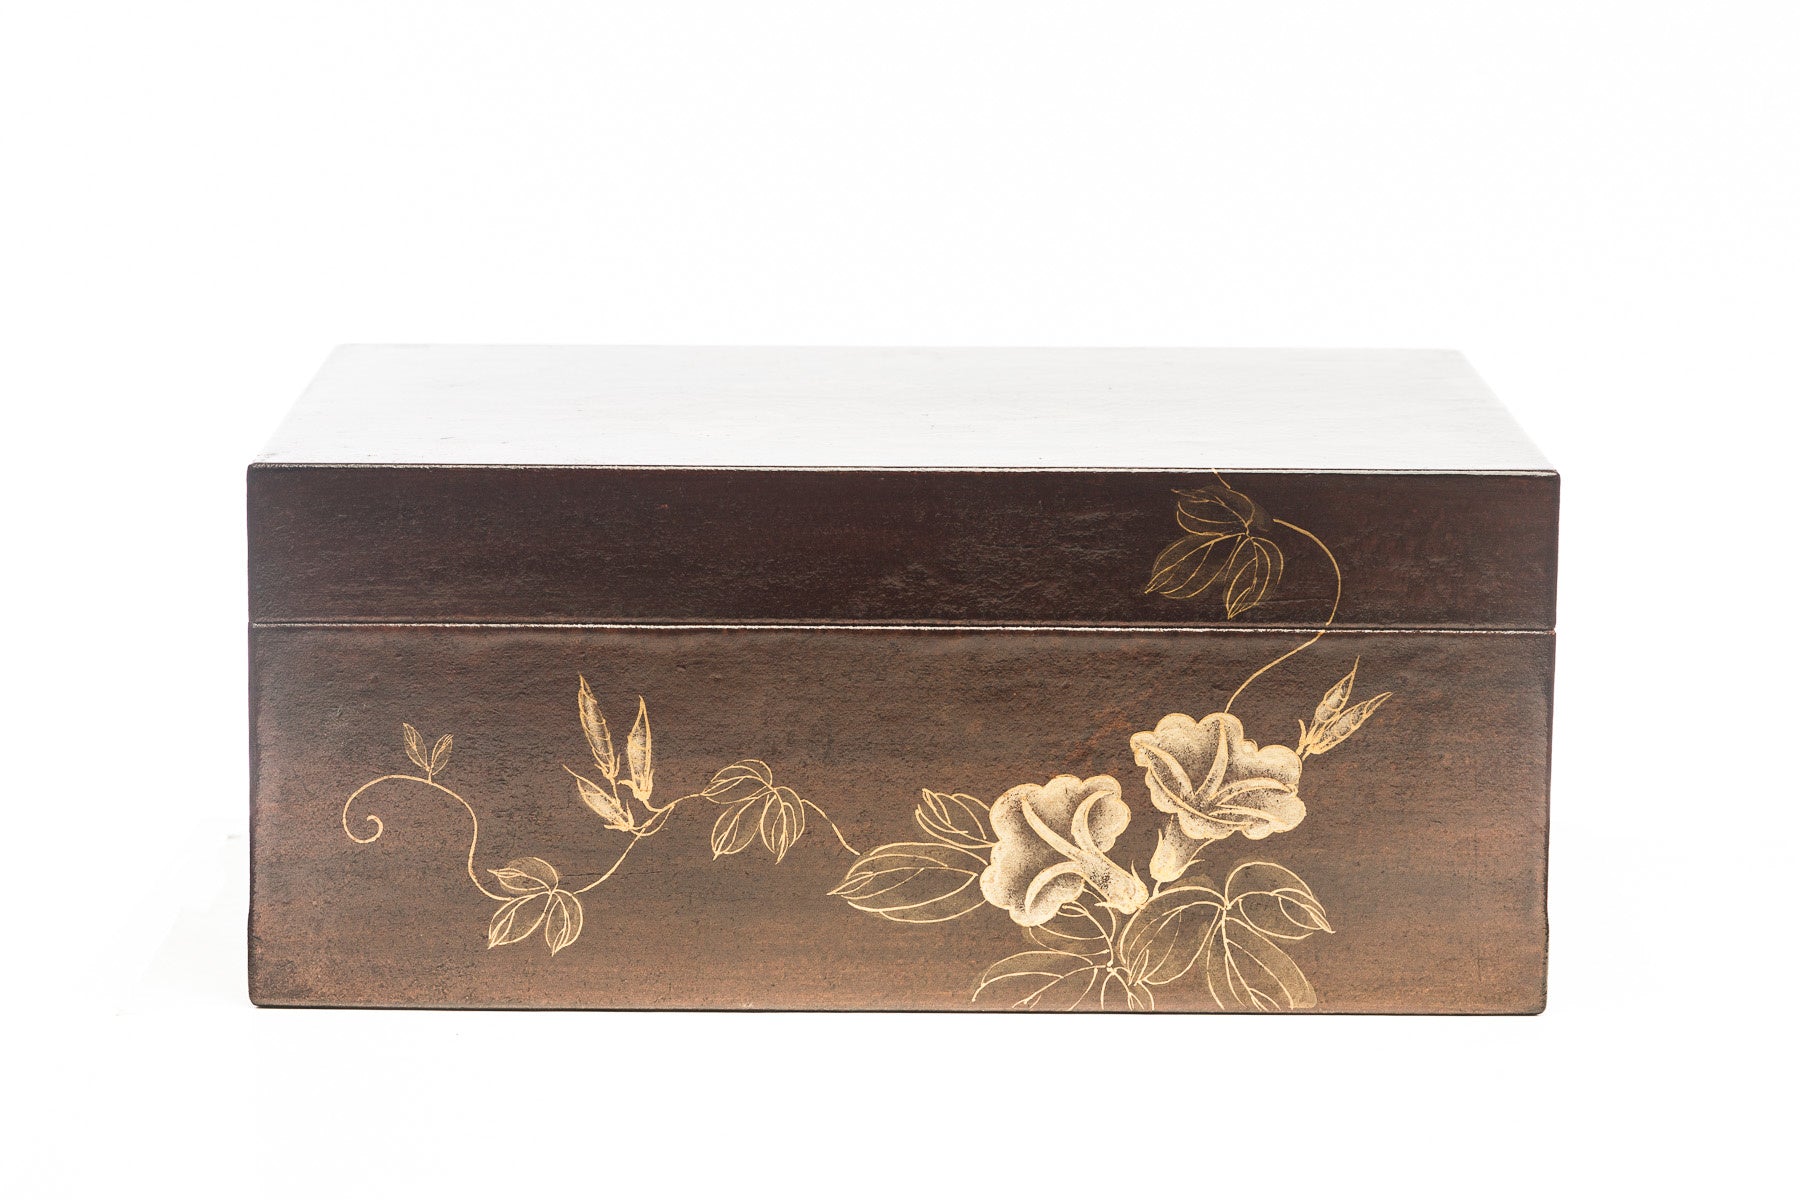 Mahogany Valentine Leather Box (16.5") with hand-painted morning glories